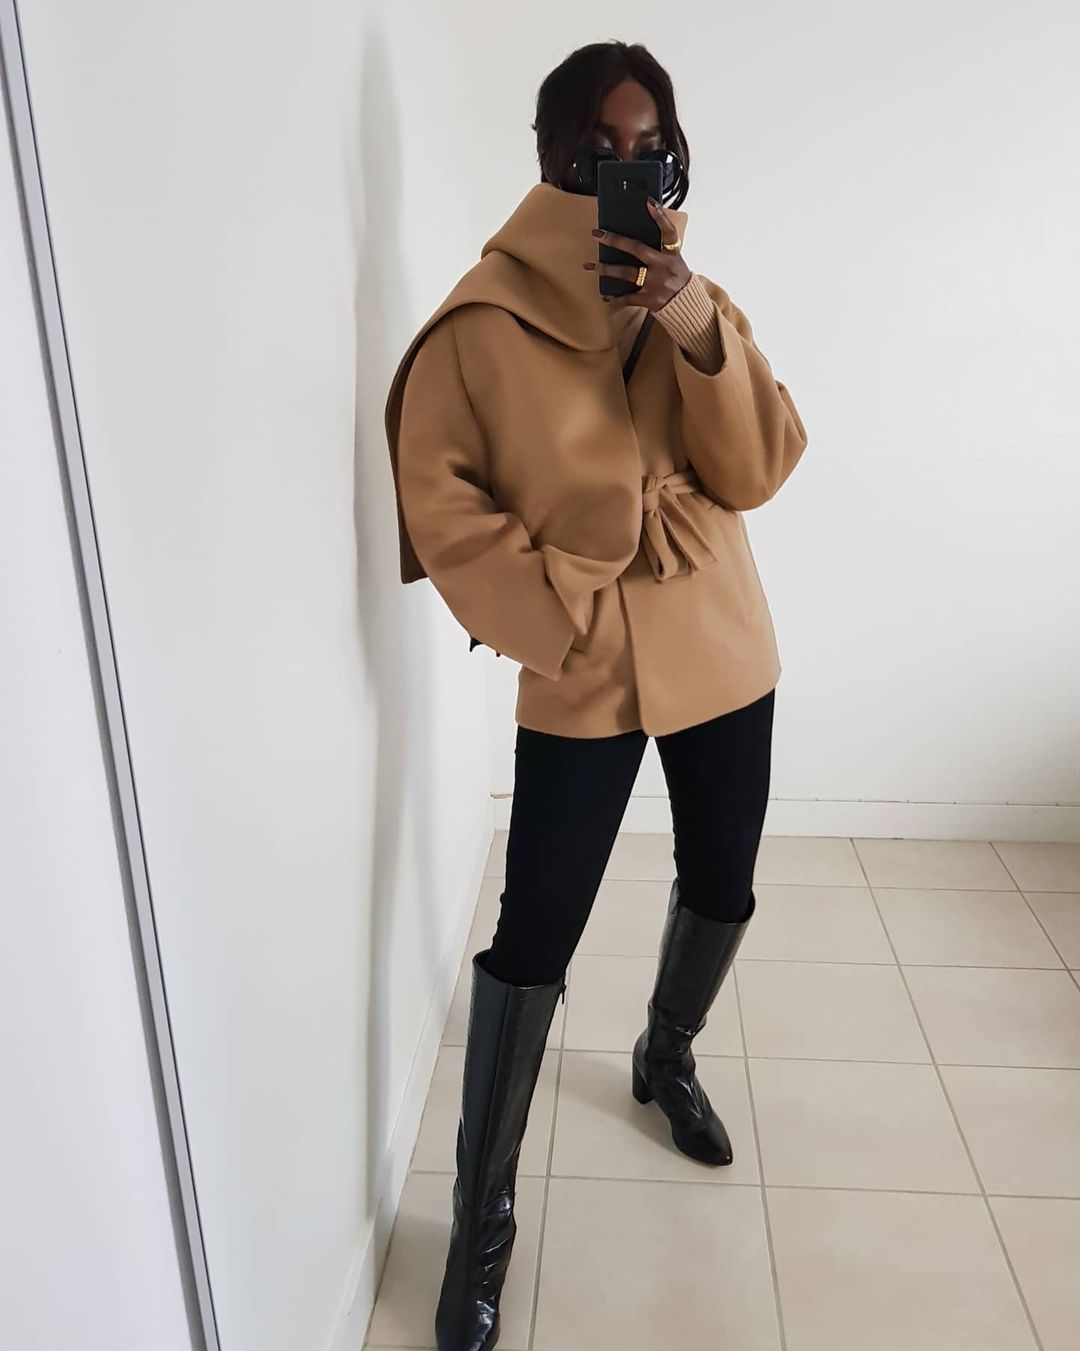 Camel Is the Color Everyone Should Have in Their Winter Wardrobe